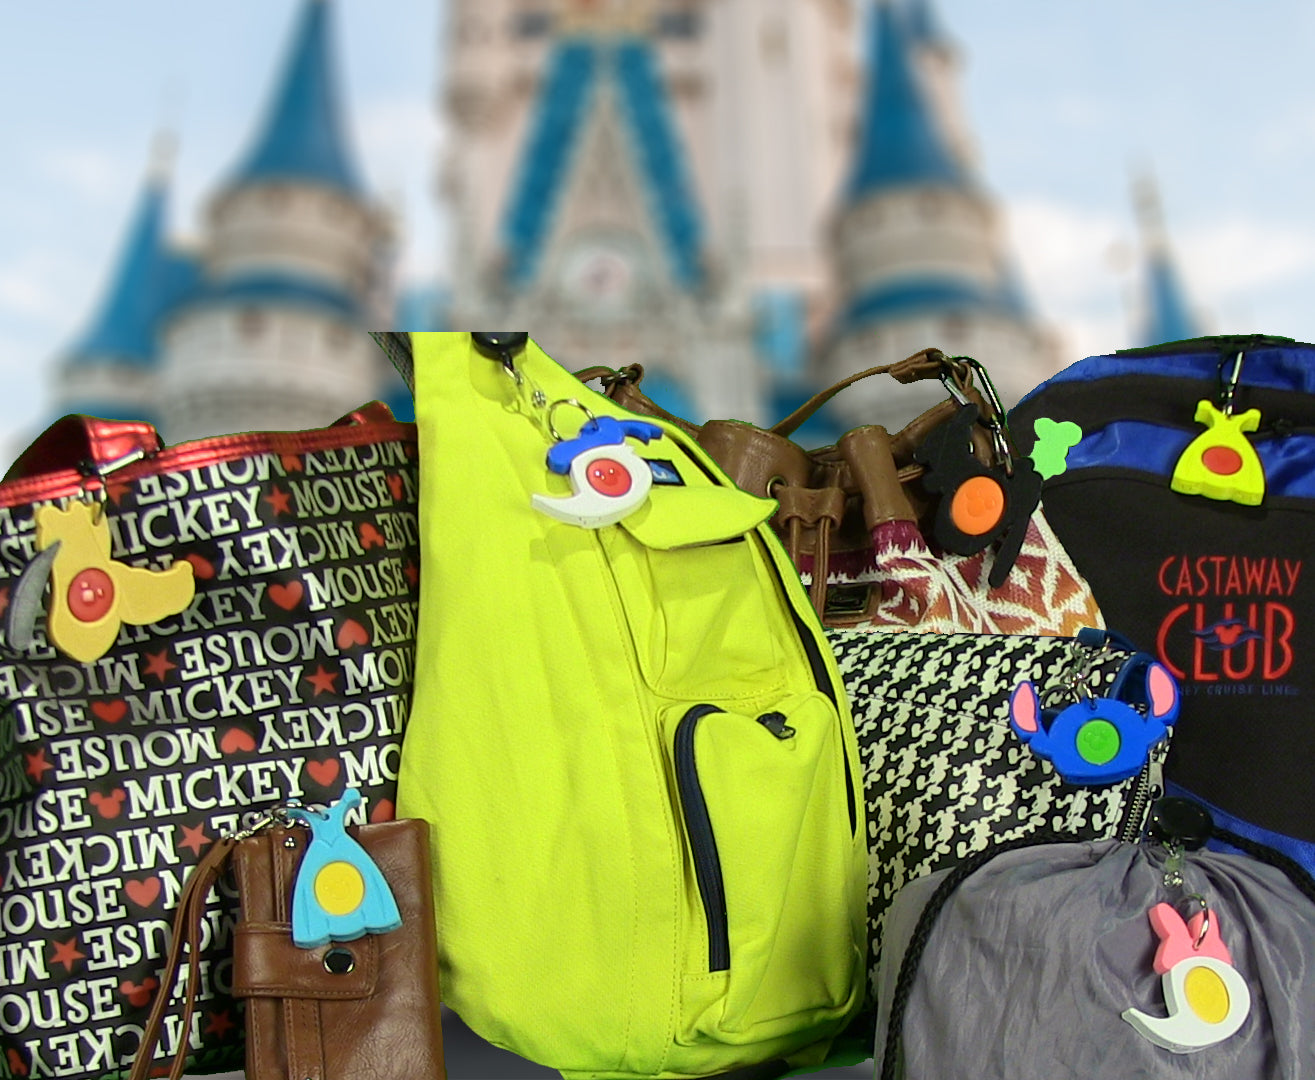 Many different Magic Band Buddies shown attached to various bags and backpacks